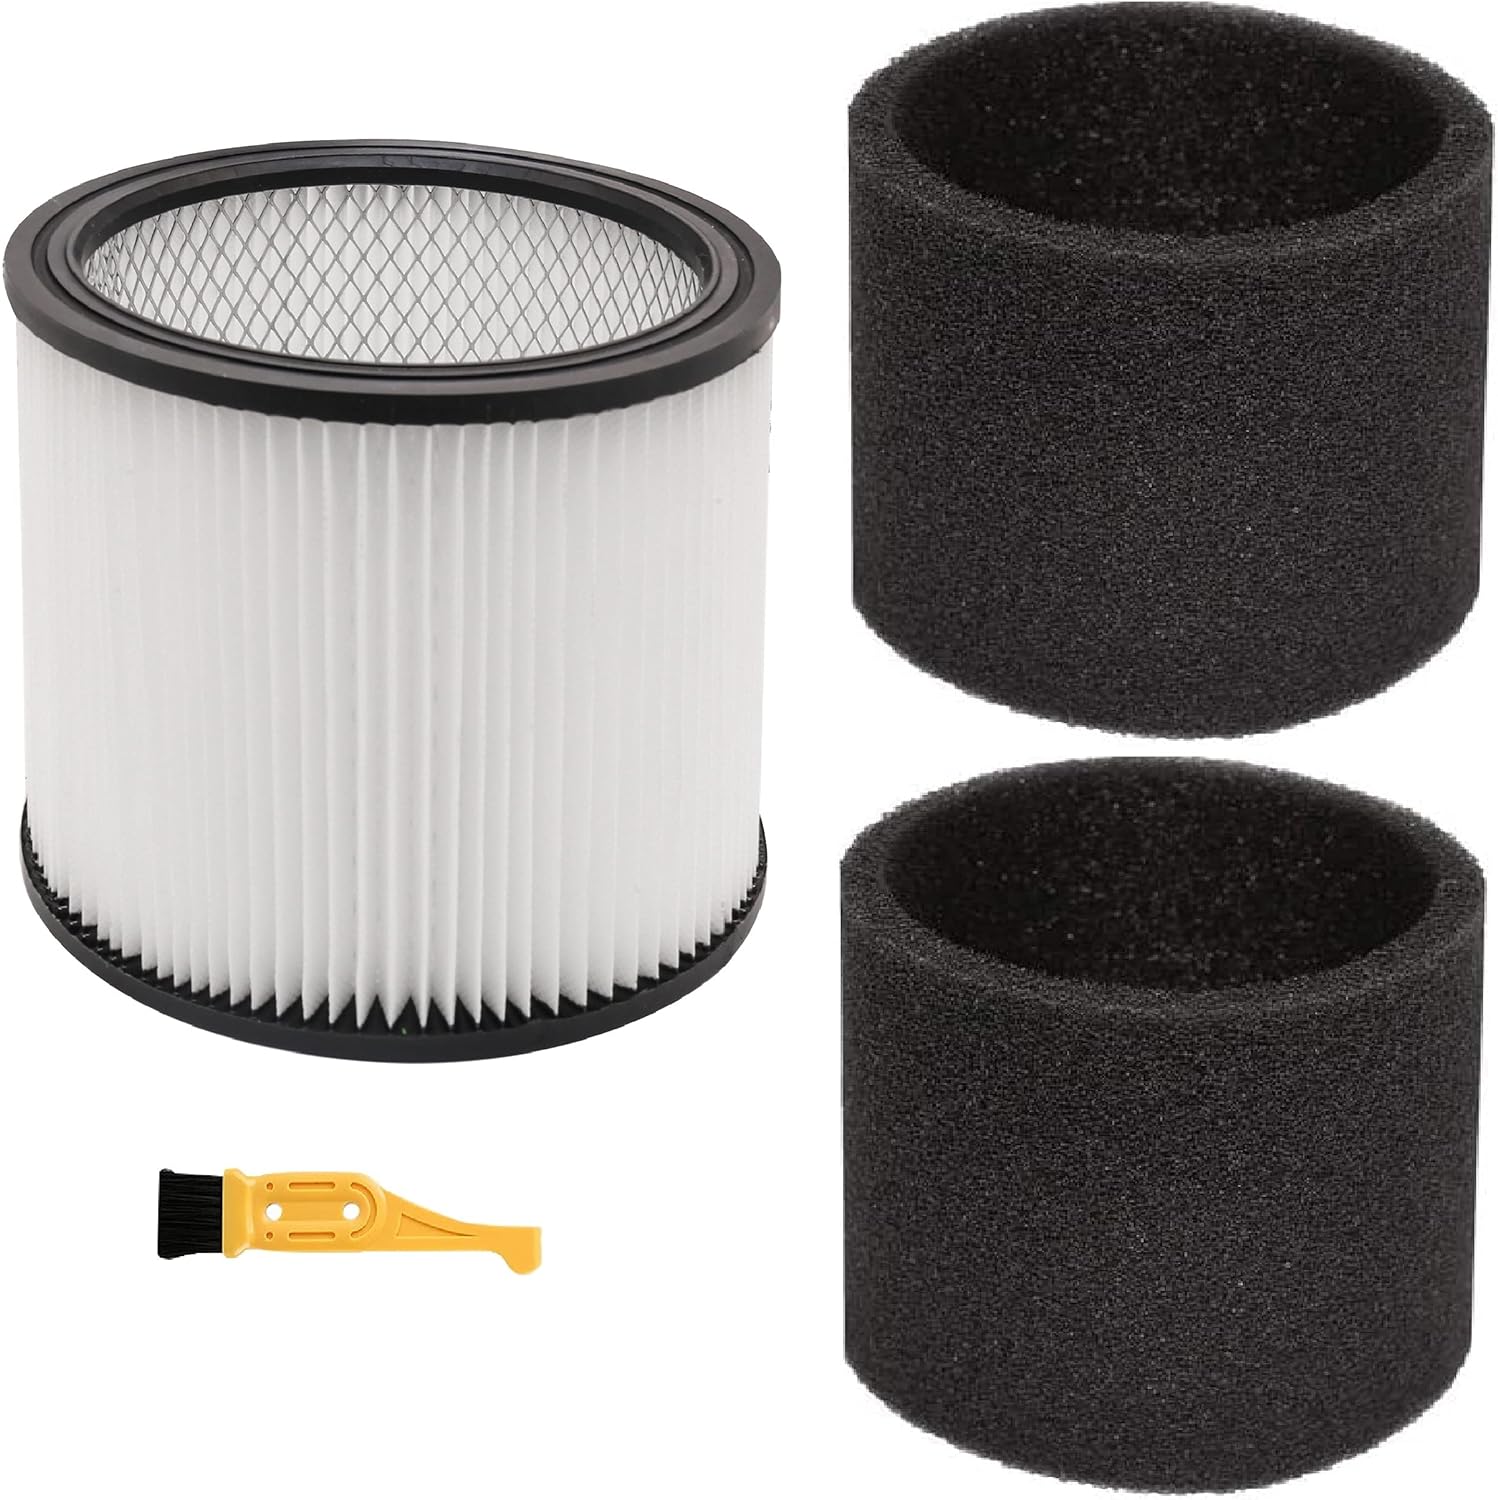 Anboo Replacement 90304 90350 90333 9030462 Cartridge Filter Foam Sleeve Compatible with Shop-Vac 5 Gallon Up Wet/Dry Vacuum Cleaners